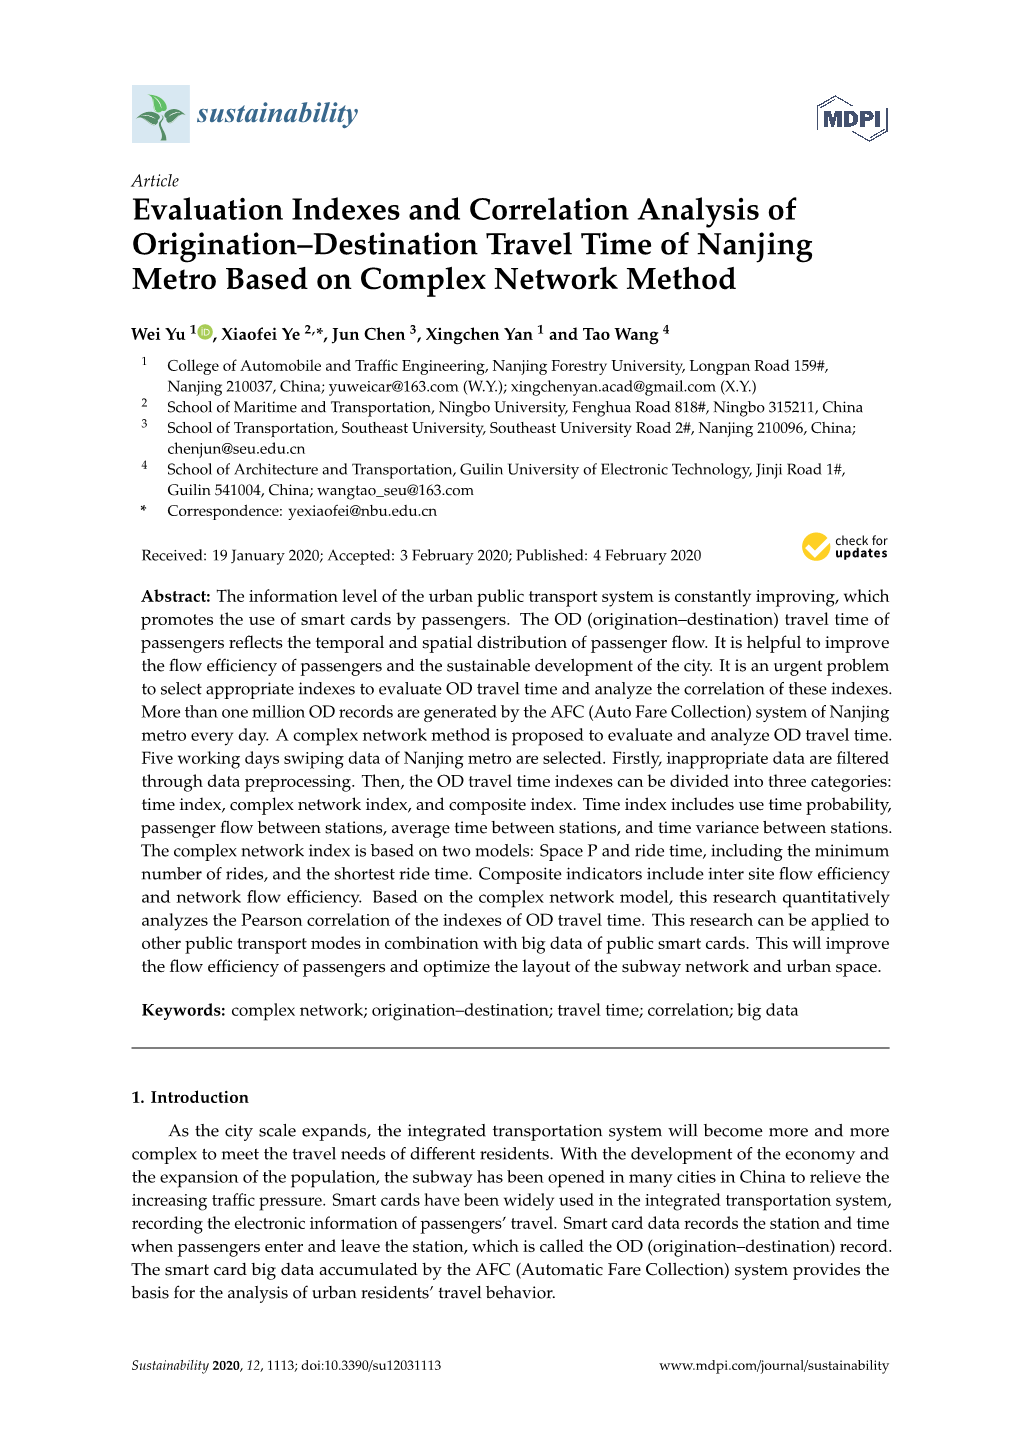 Evaluation Indexes and Correlation Analysis of Origination–Destination Travel Time of Nanjing Metro Based on Complex Network Method